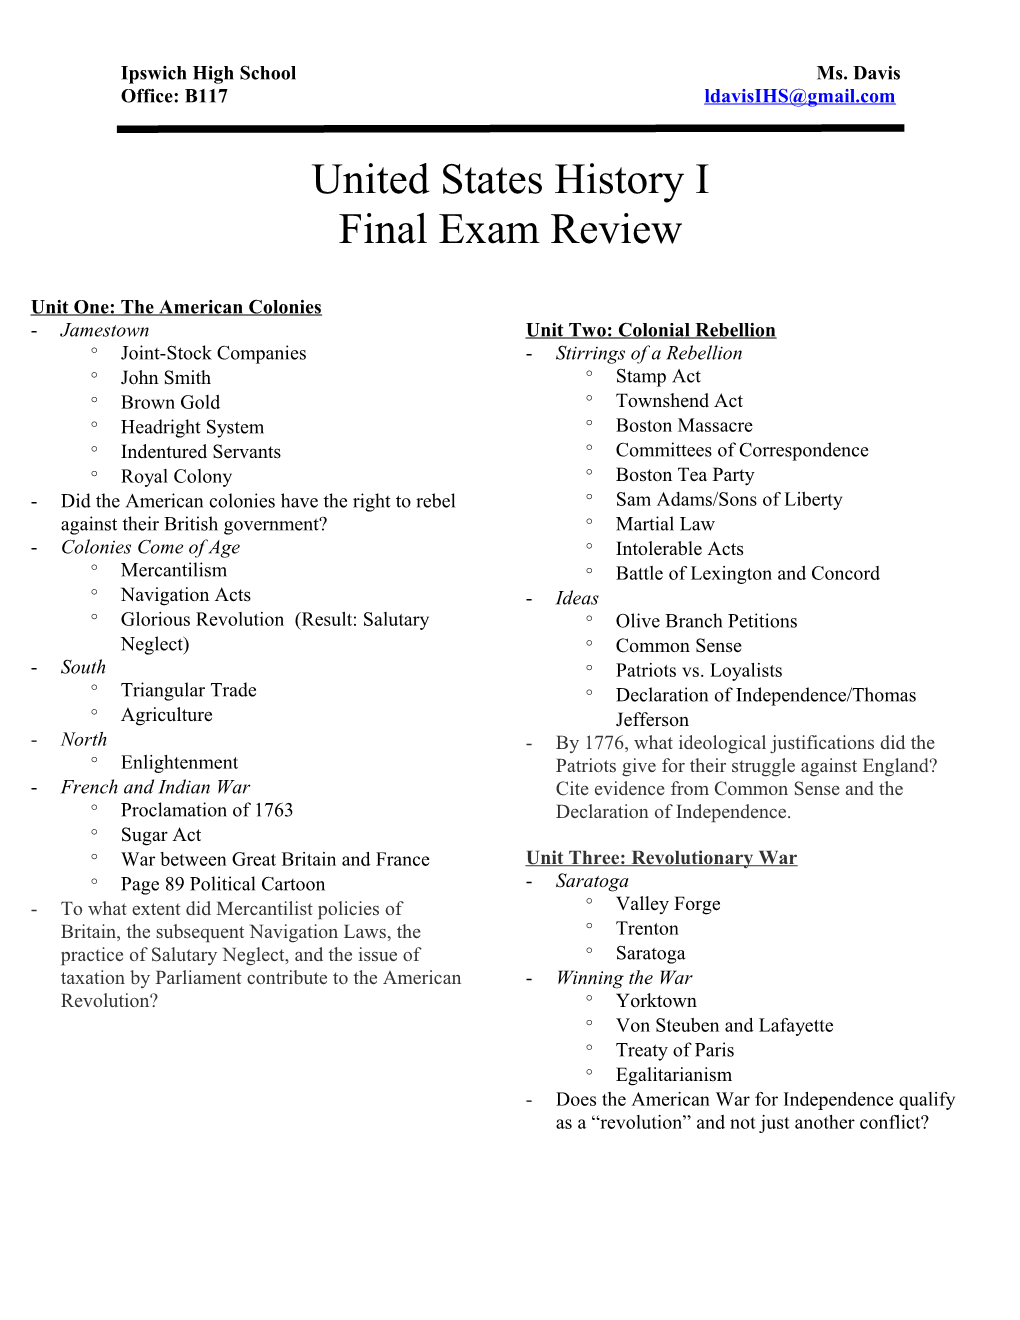 United States History Final Review